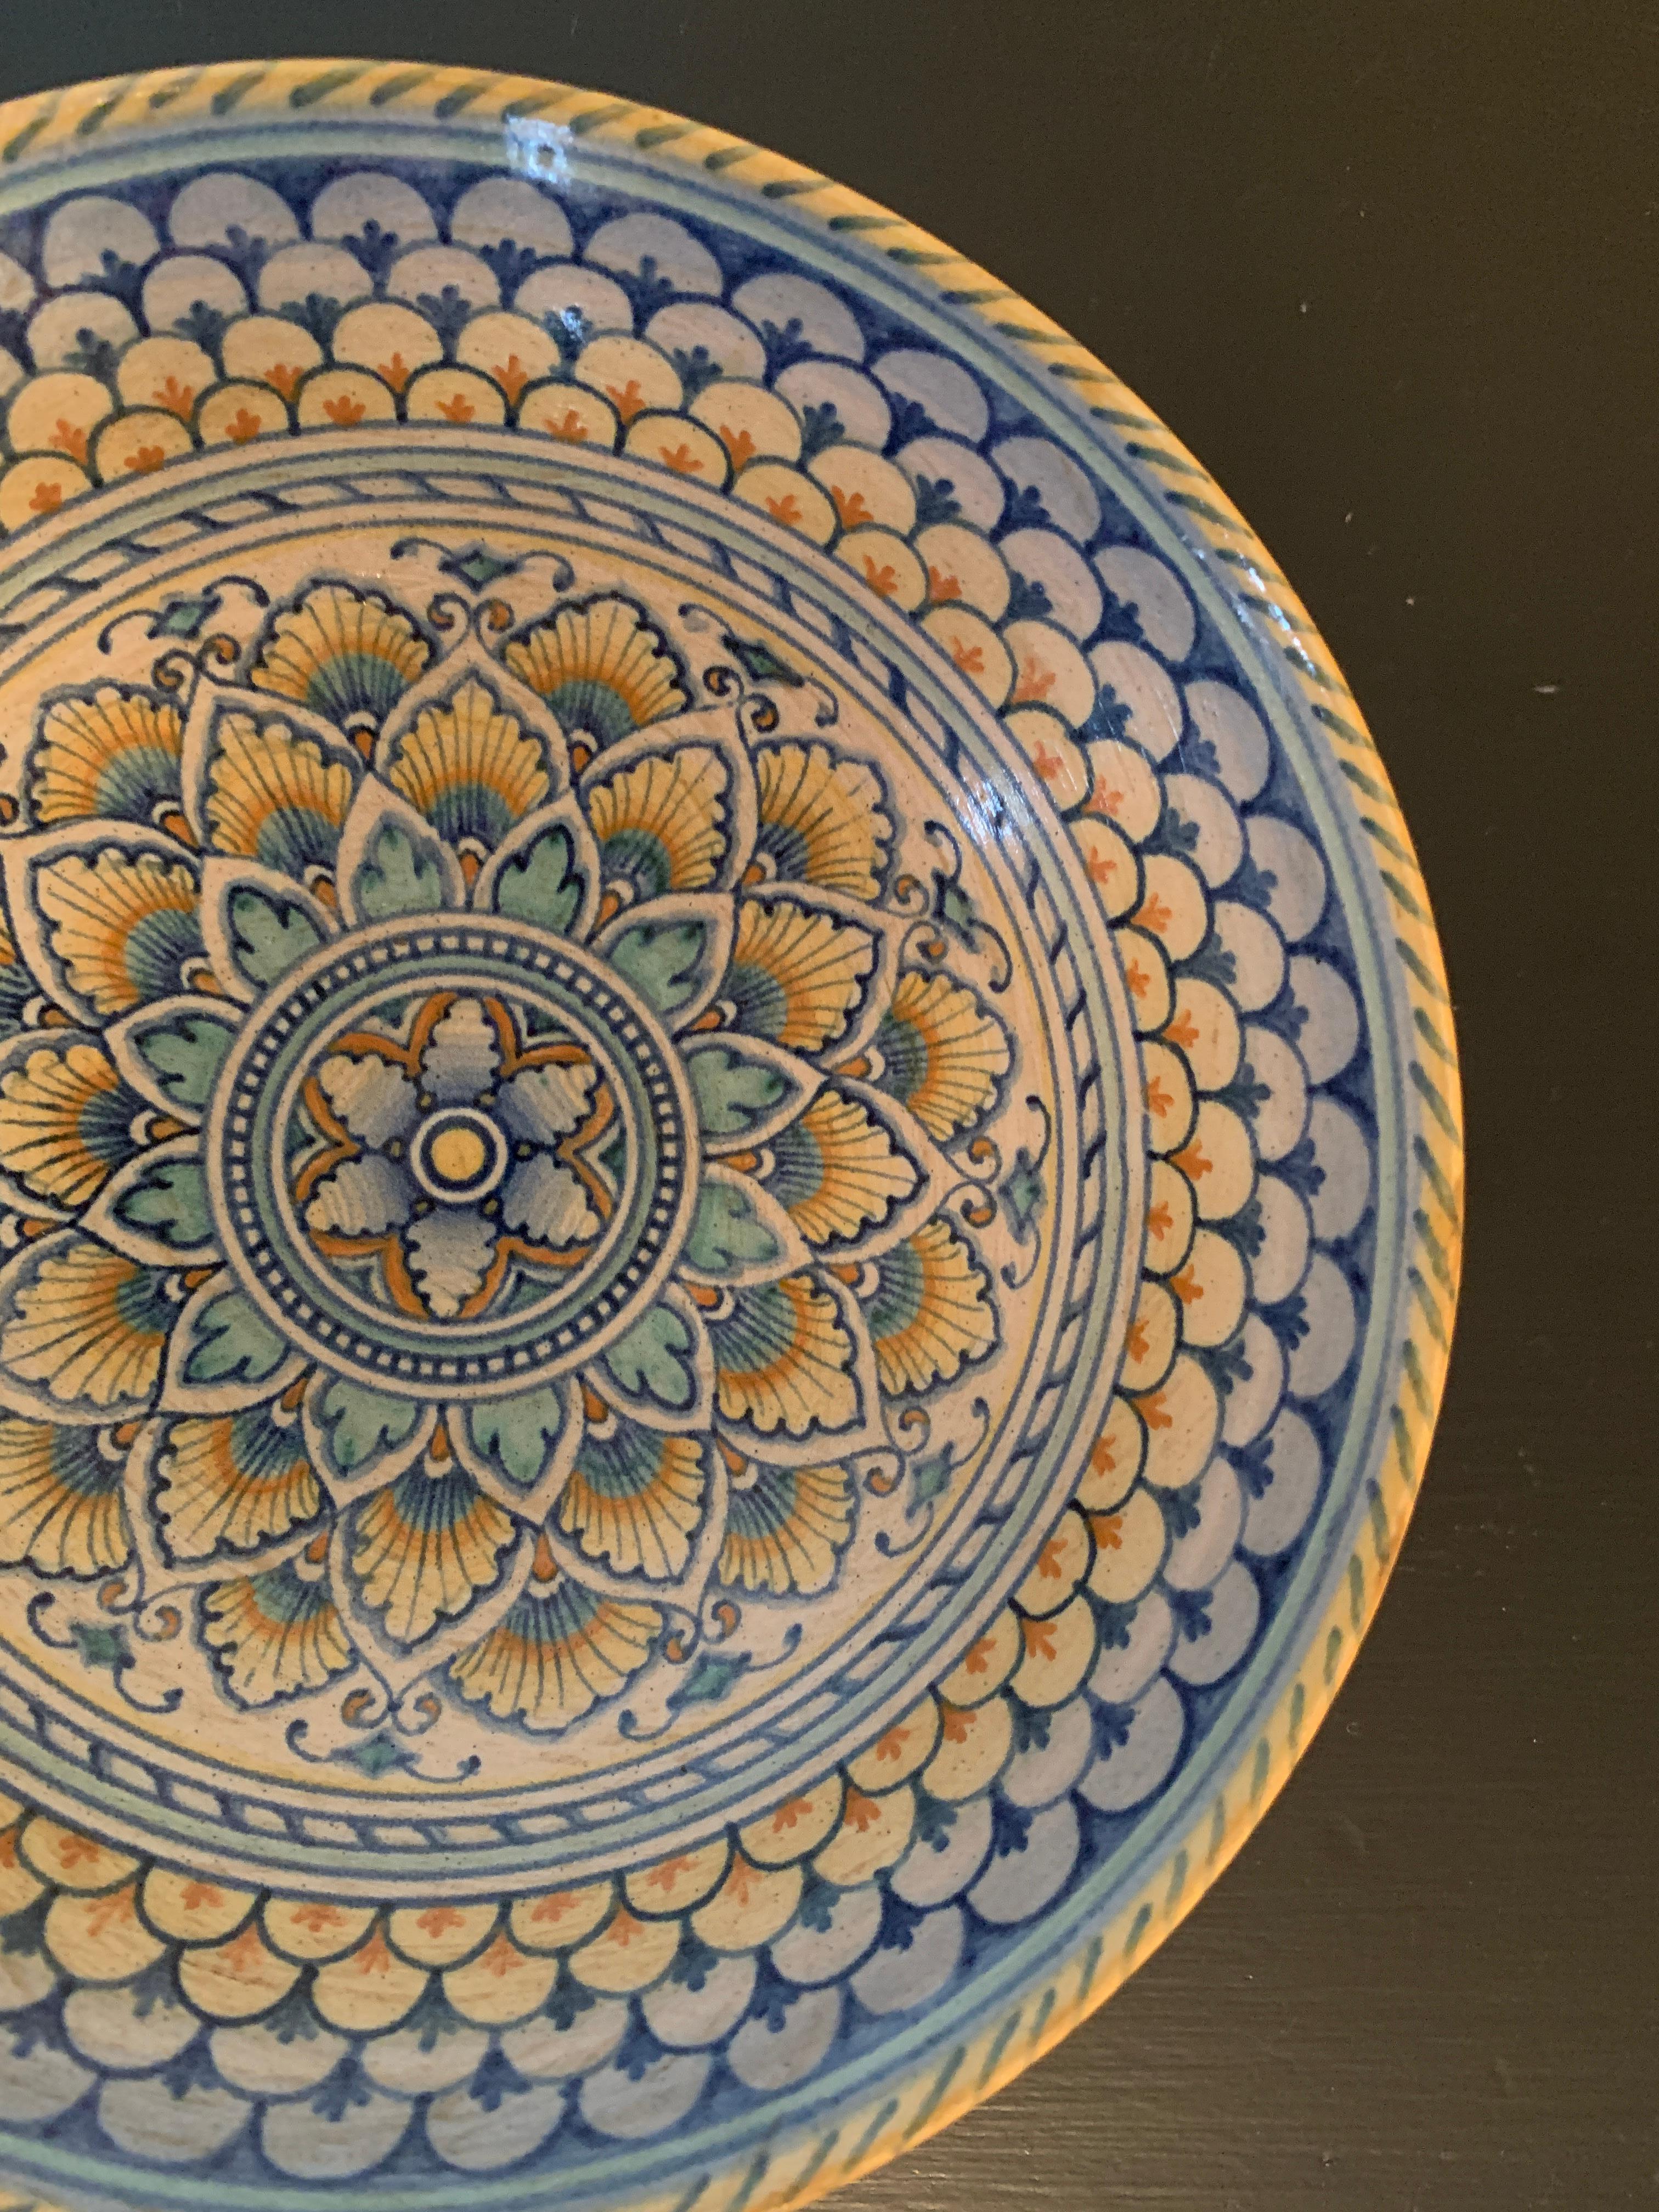 20th Century Italian Provincial Deruta Hand Painted Faience Pottery Bowl